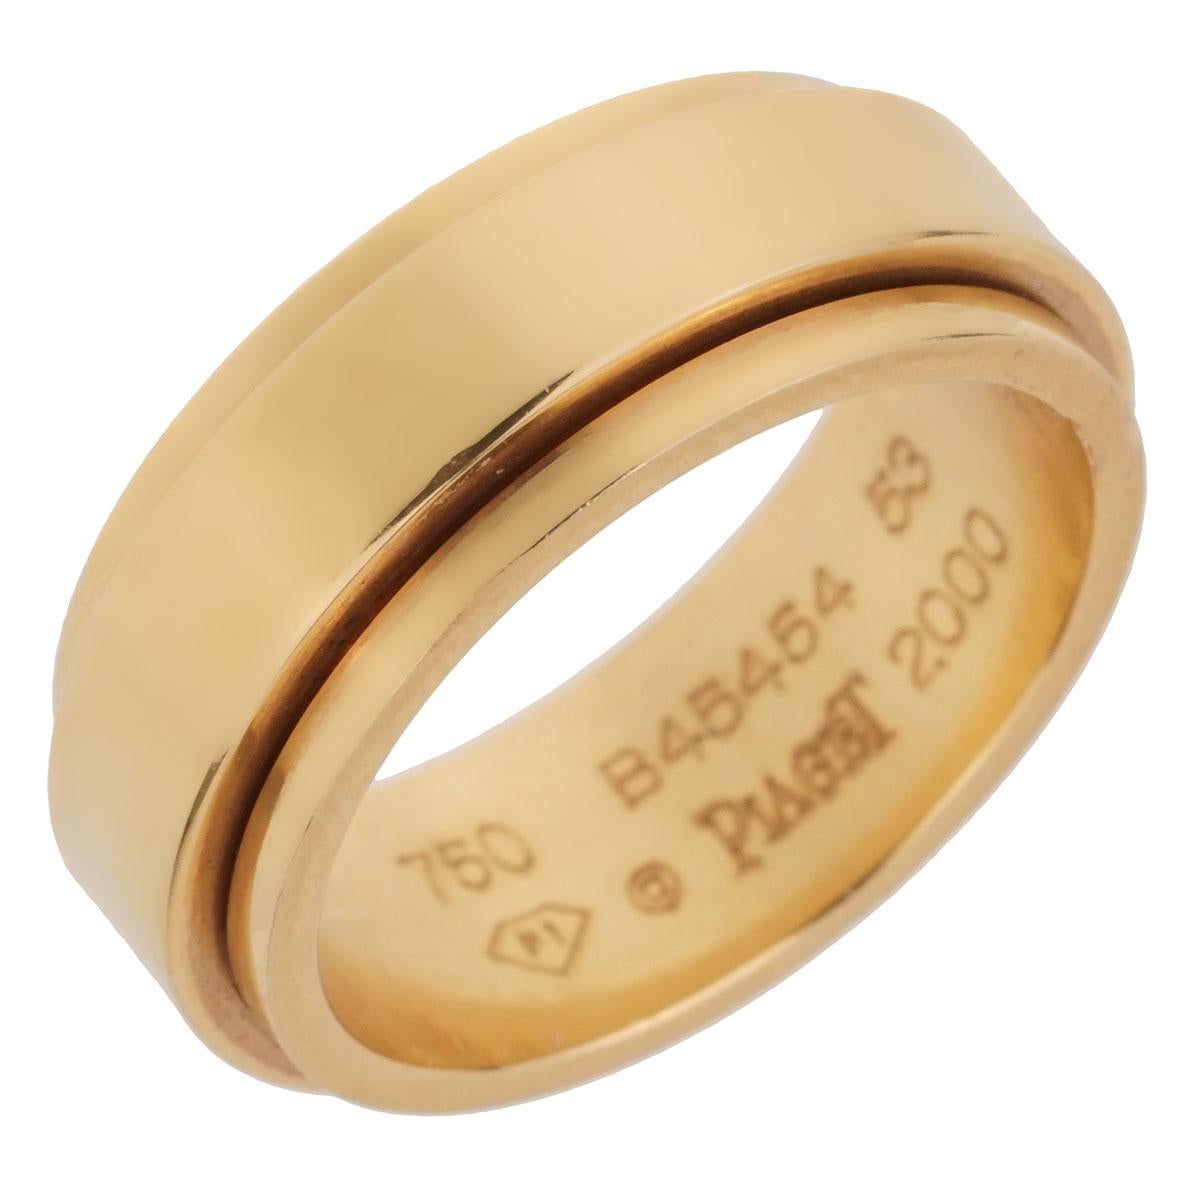 An iconic Piaget Possession yellow gold spinning ring in 18k yellow gold. The ring measures size 6 1/2